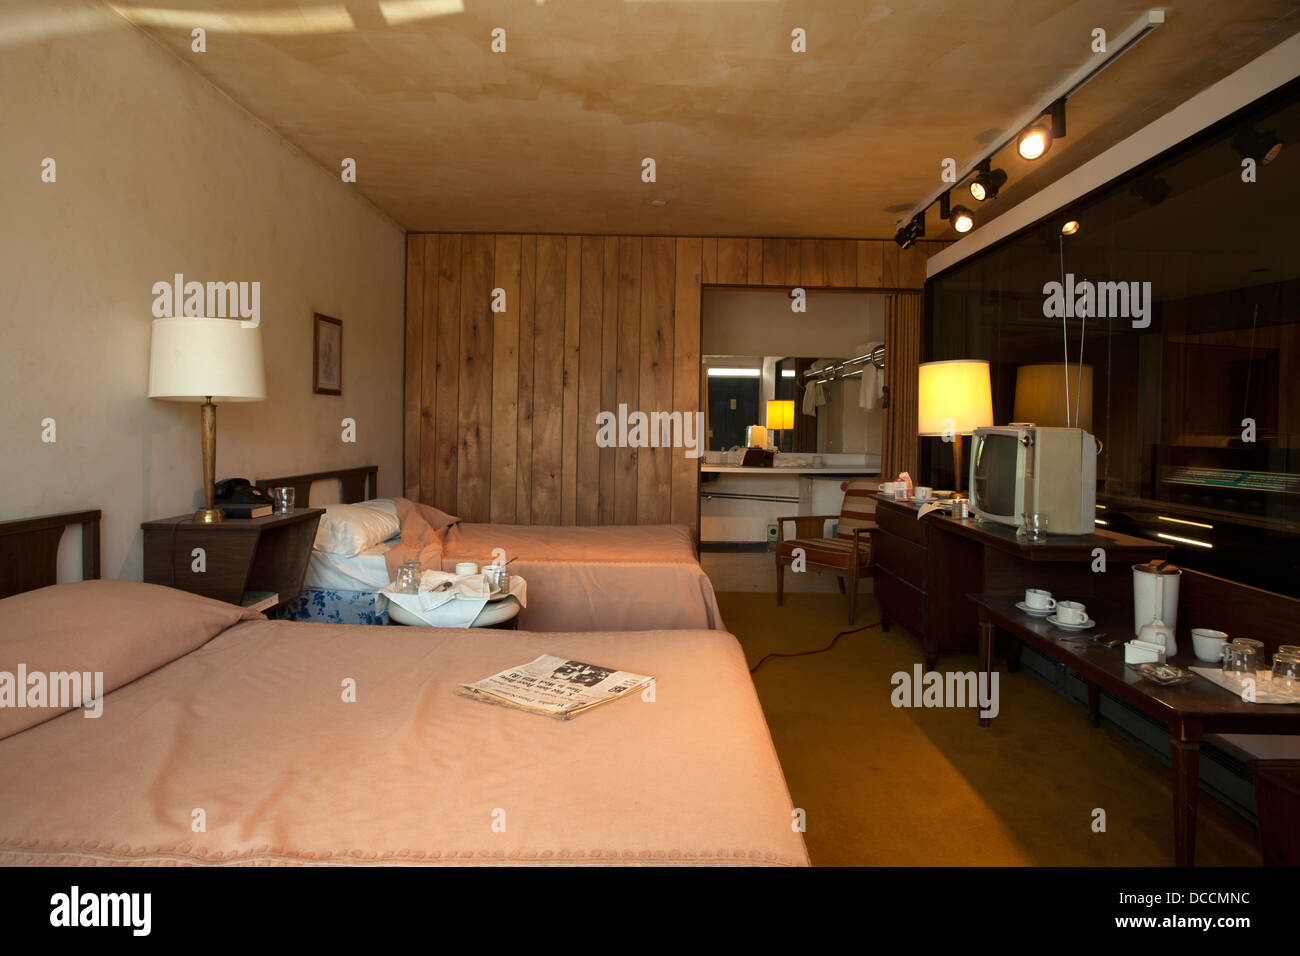 Martin Luther King's room 306 at the Lorraine Motel where he was assassinated in 1968  in Memphis Tennessee USA Stock Photo